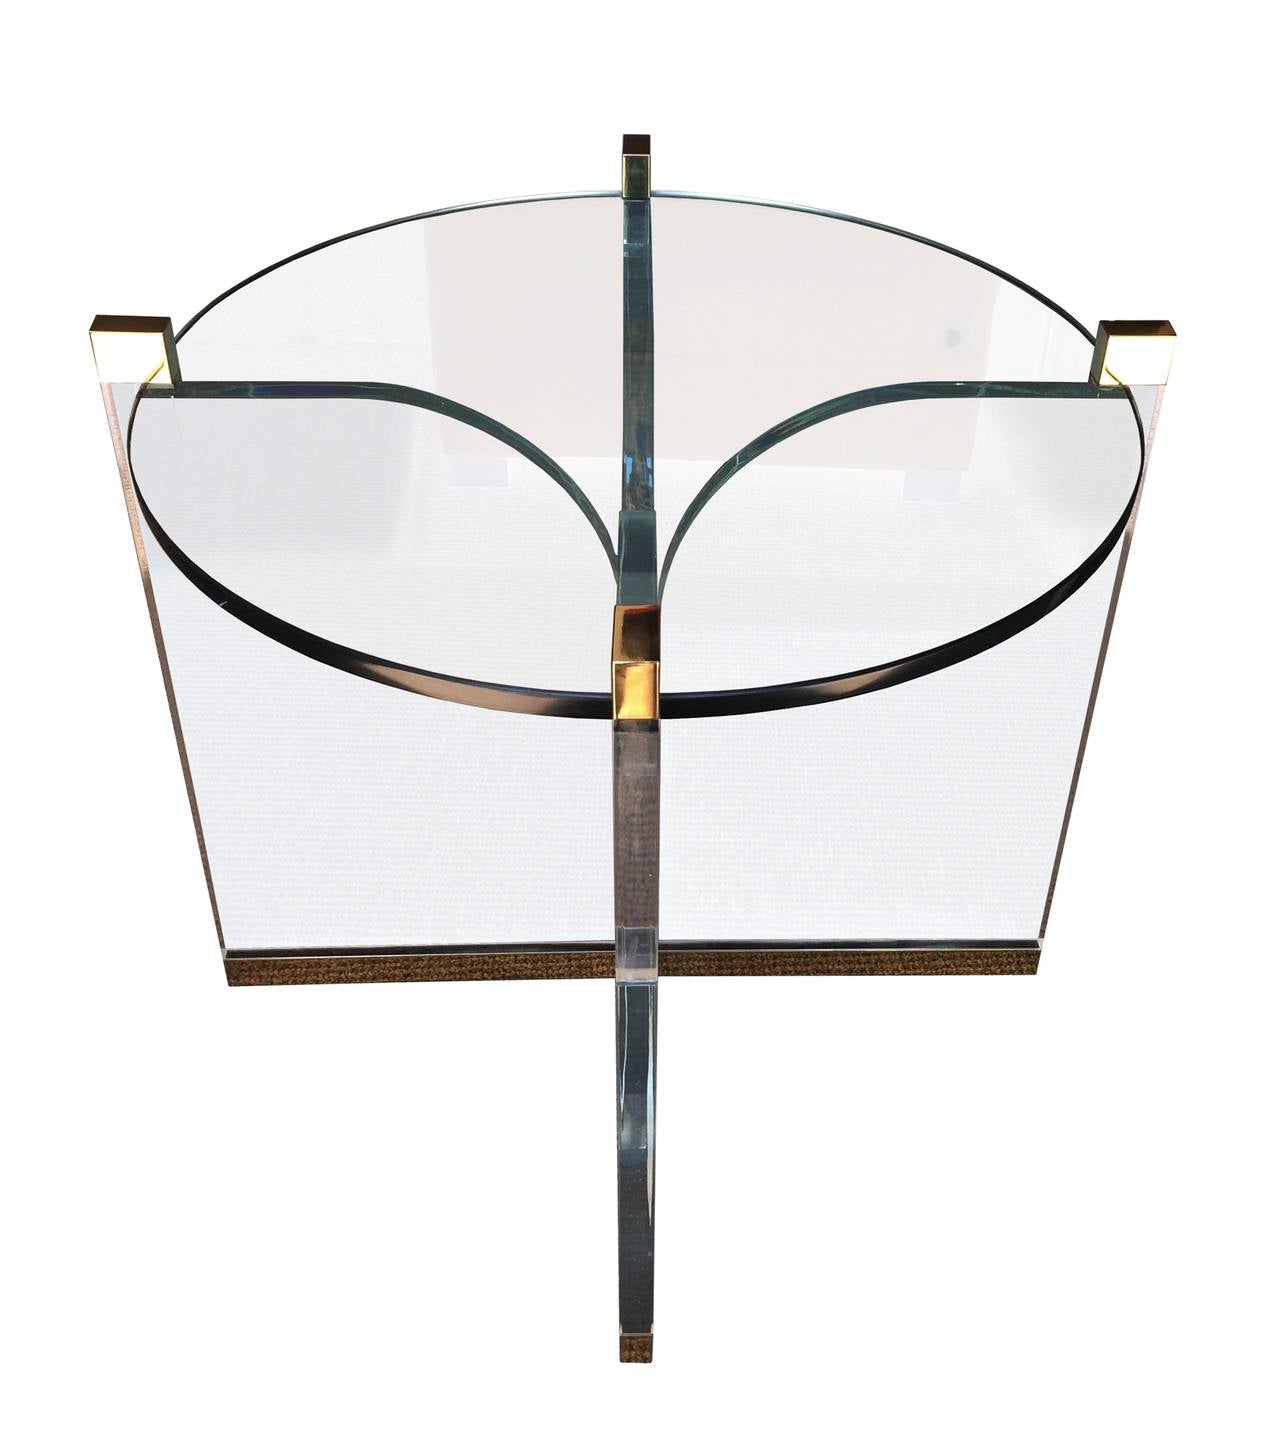 Stunning center table in Lucite and brass designed and manufactured my Charles Hollis Jones in the mid-1970s. The table is very delicate to the eye and yet very imposing in design appeal, they combination of metal is perfect and the execution out of